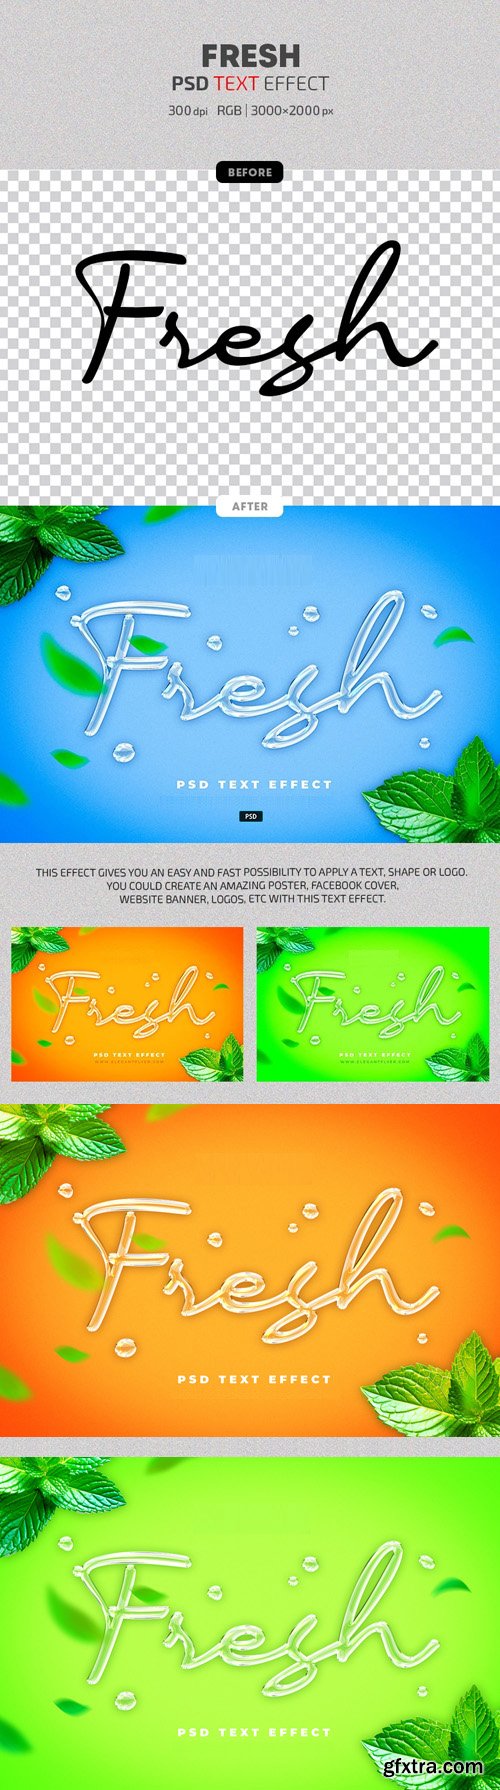 Fresh Text Effects for Photoshop